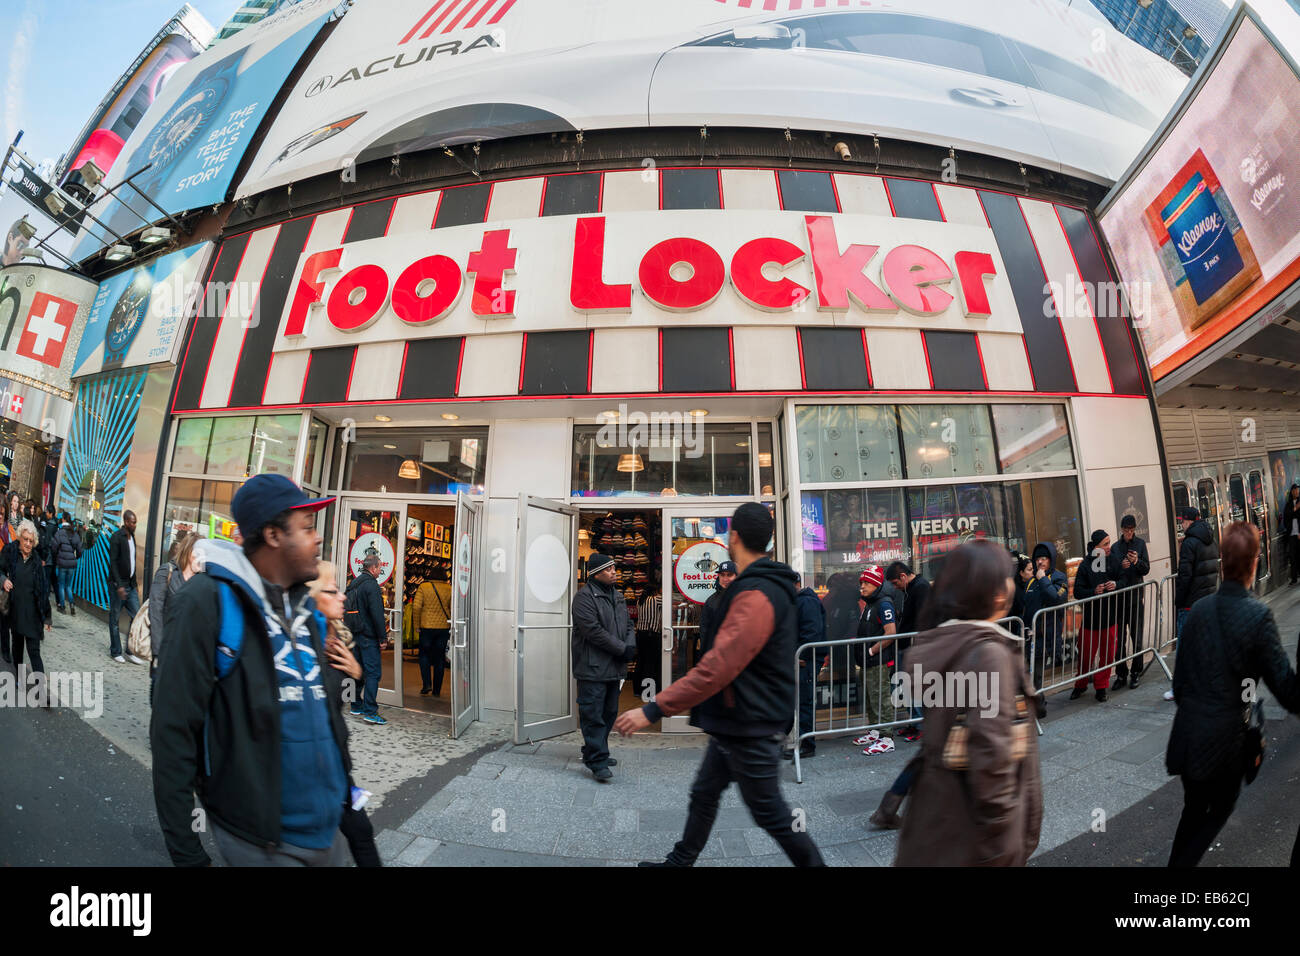 A Foot Locker store in Times Square in New York Stock Photo